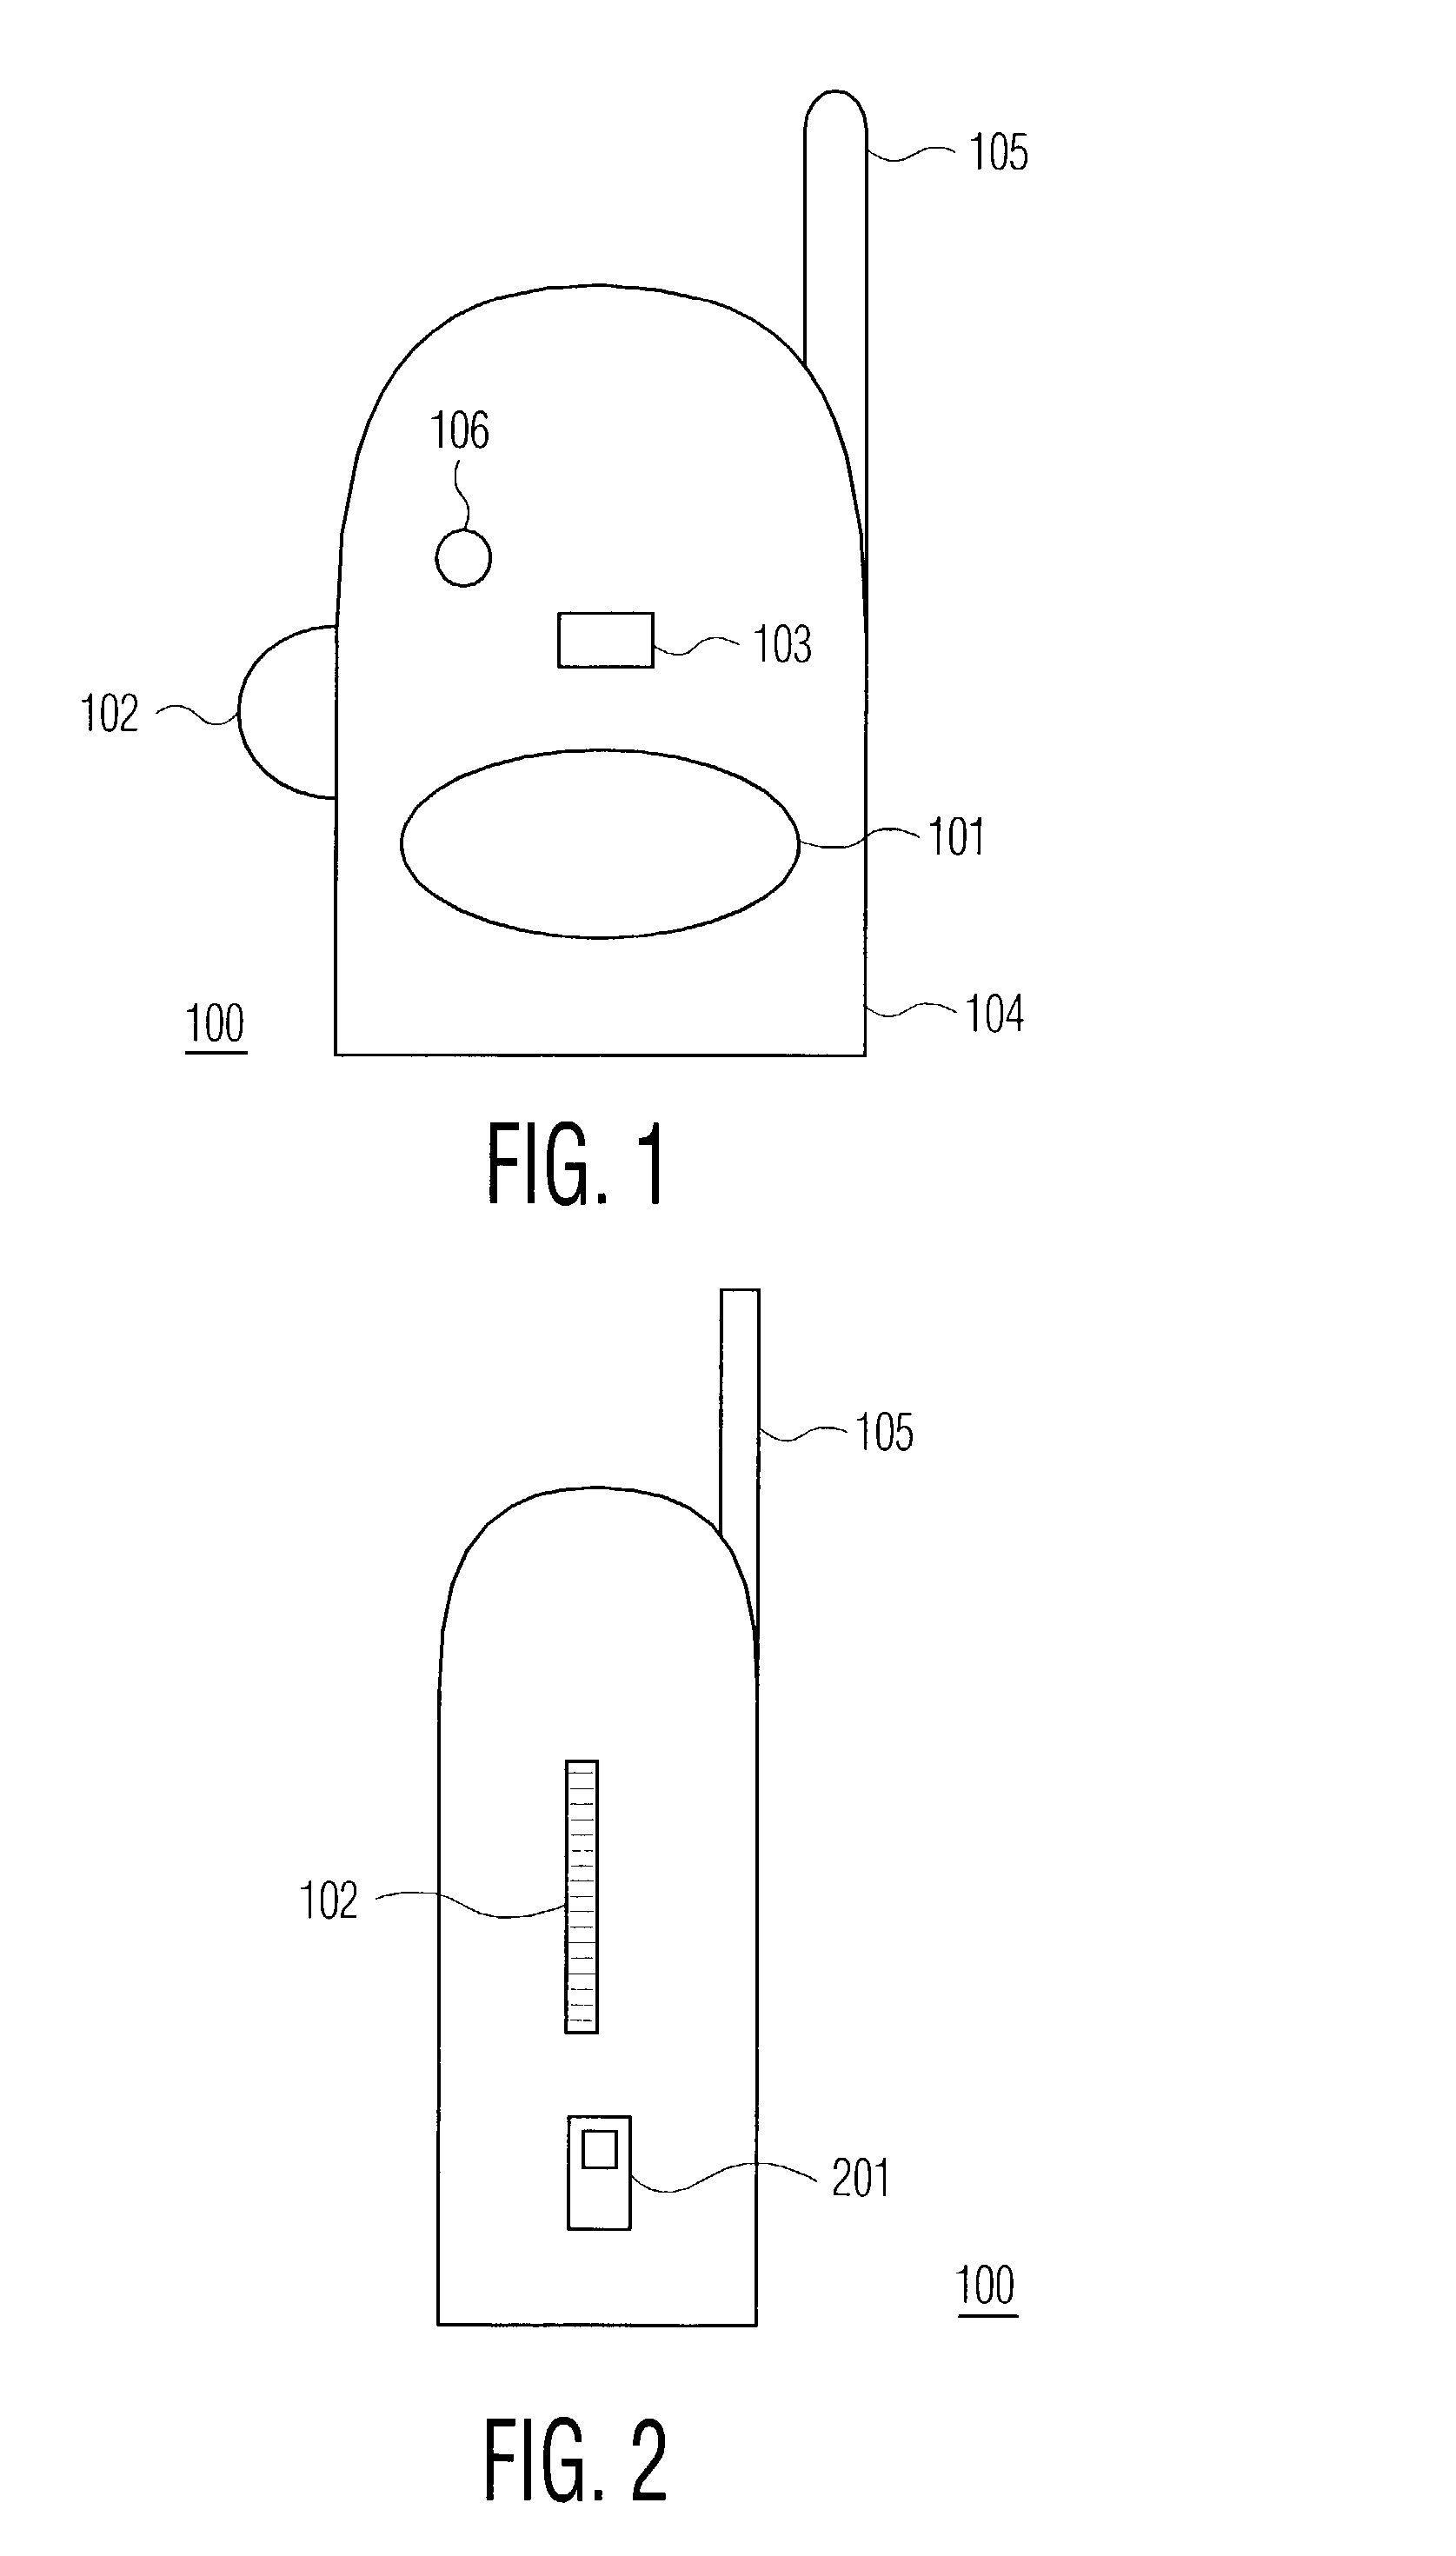 Baby monitor and method for monitoring sounds and selectively controlling audio devices